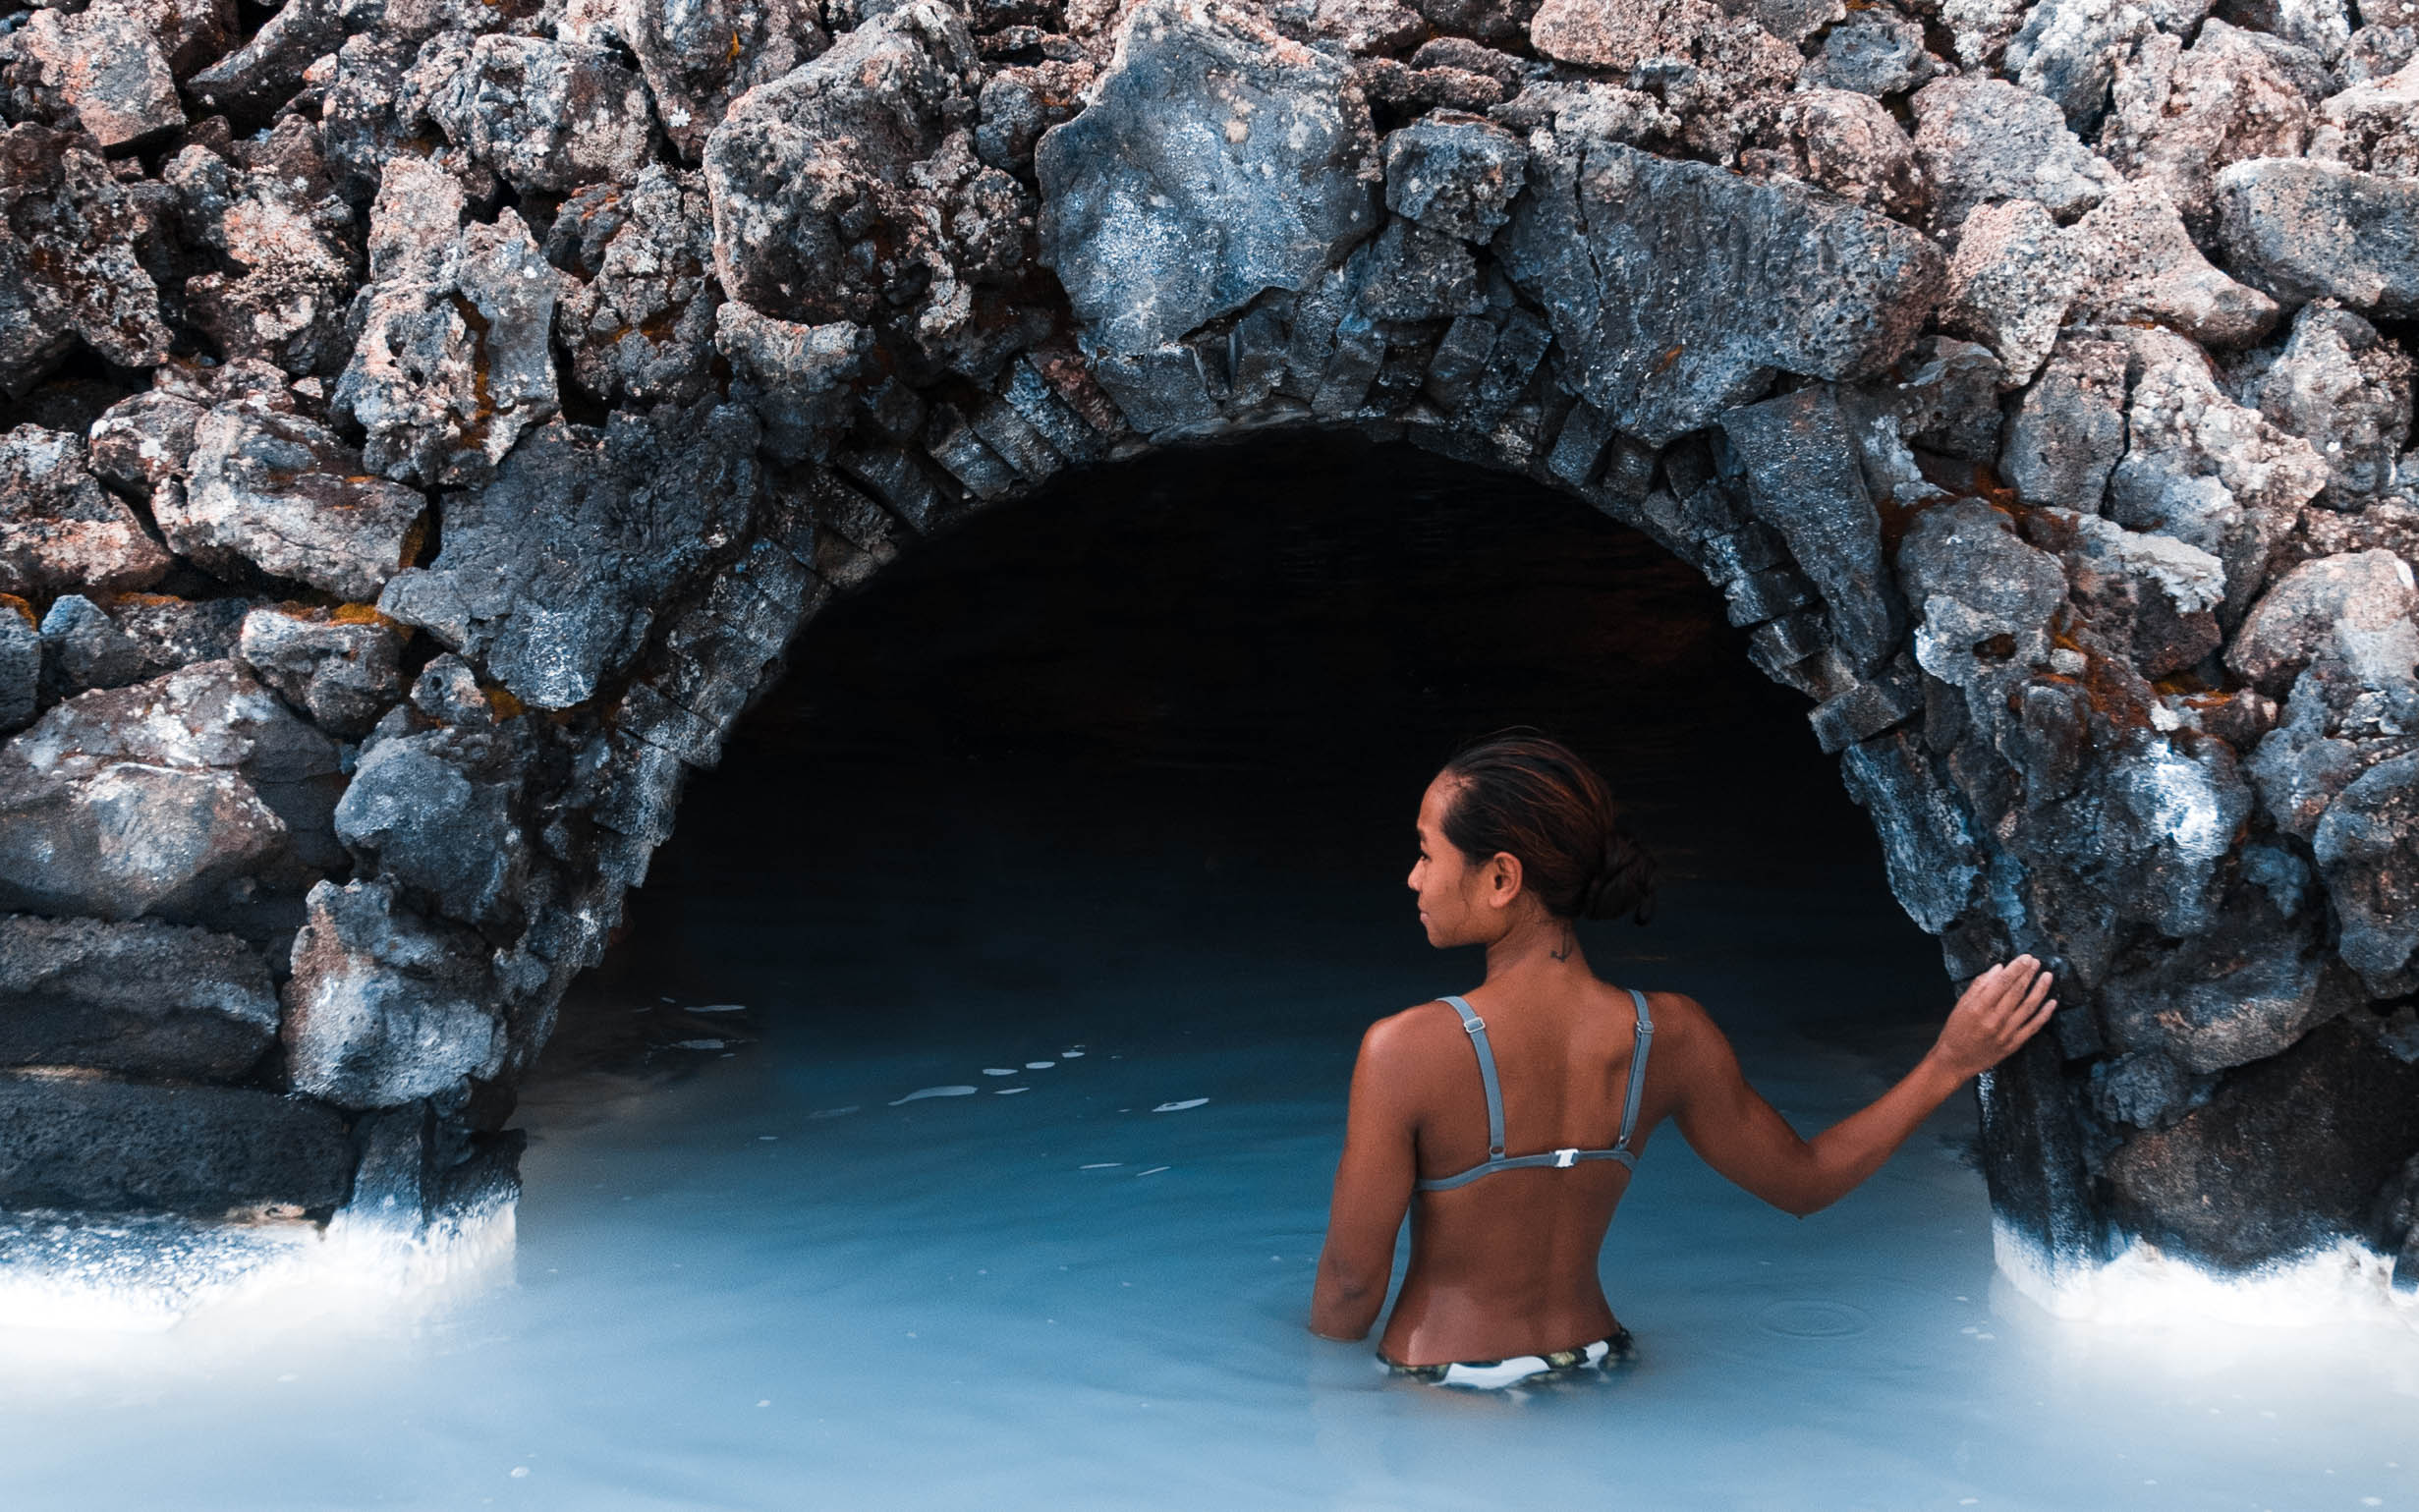 Spend a day at the Blue Lagoon and get rid of any remaining jet lag.